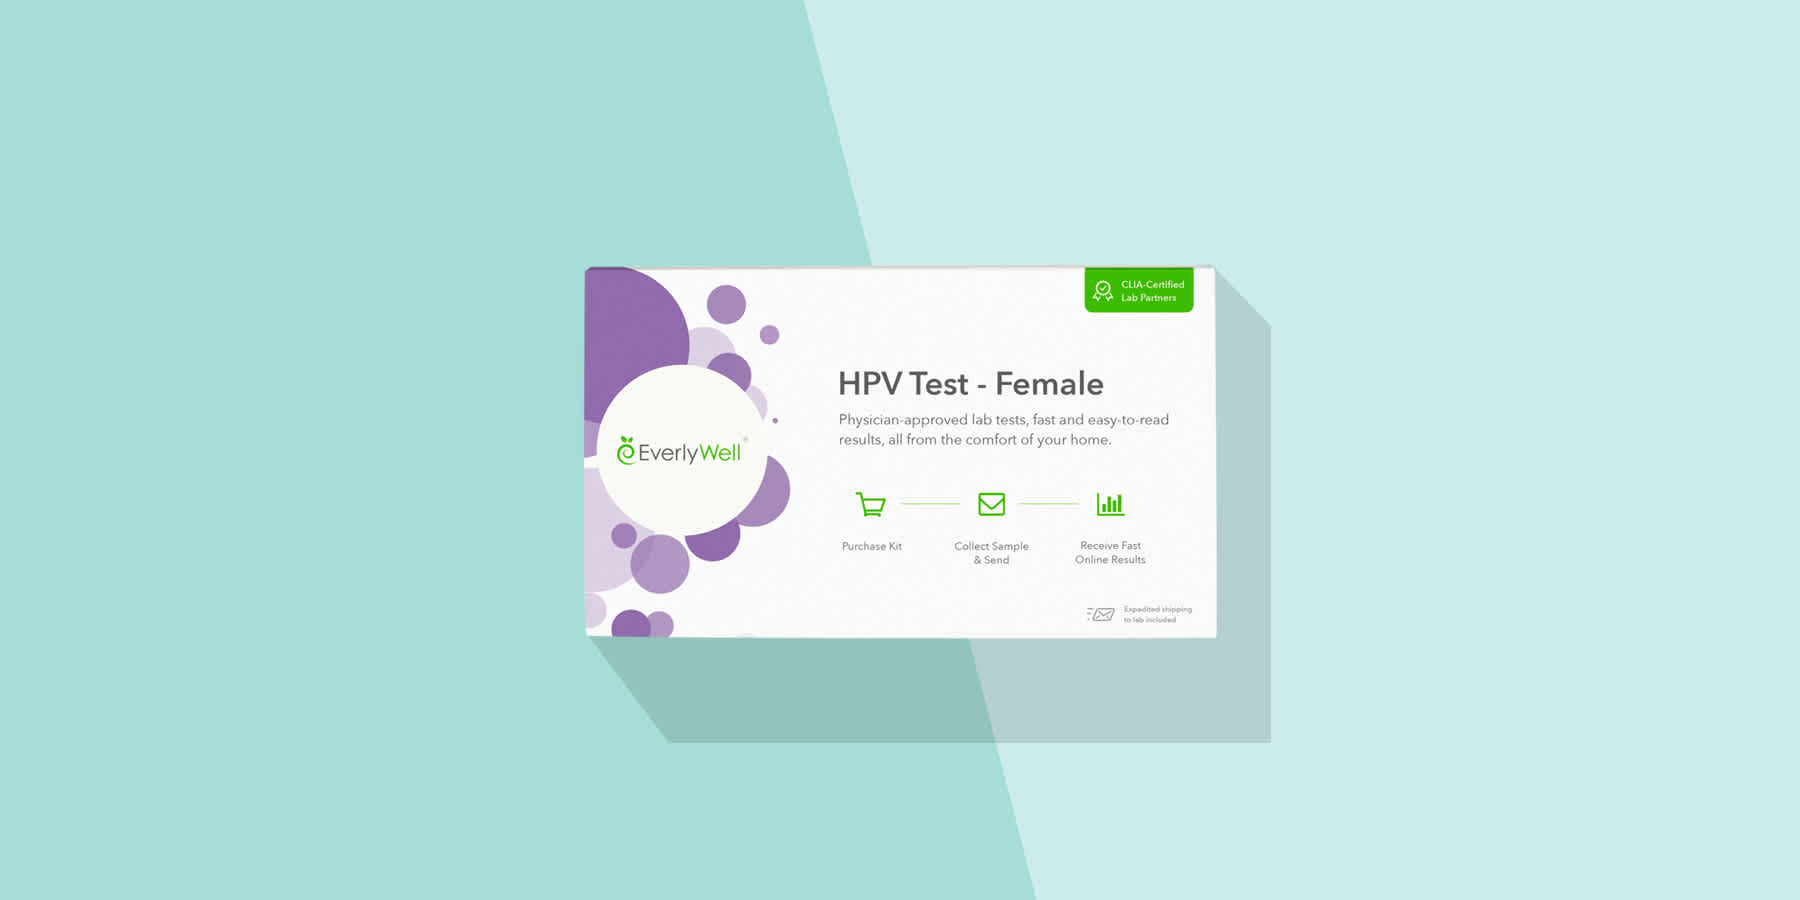 Image of Everlywell HPV Test kit against a light blue background